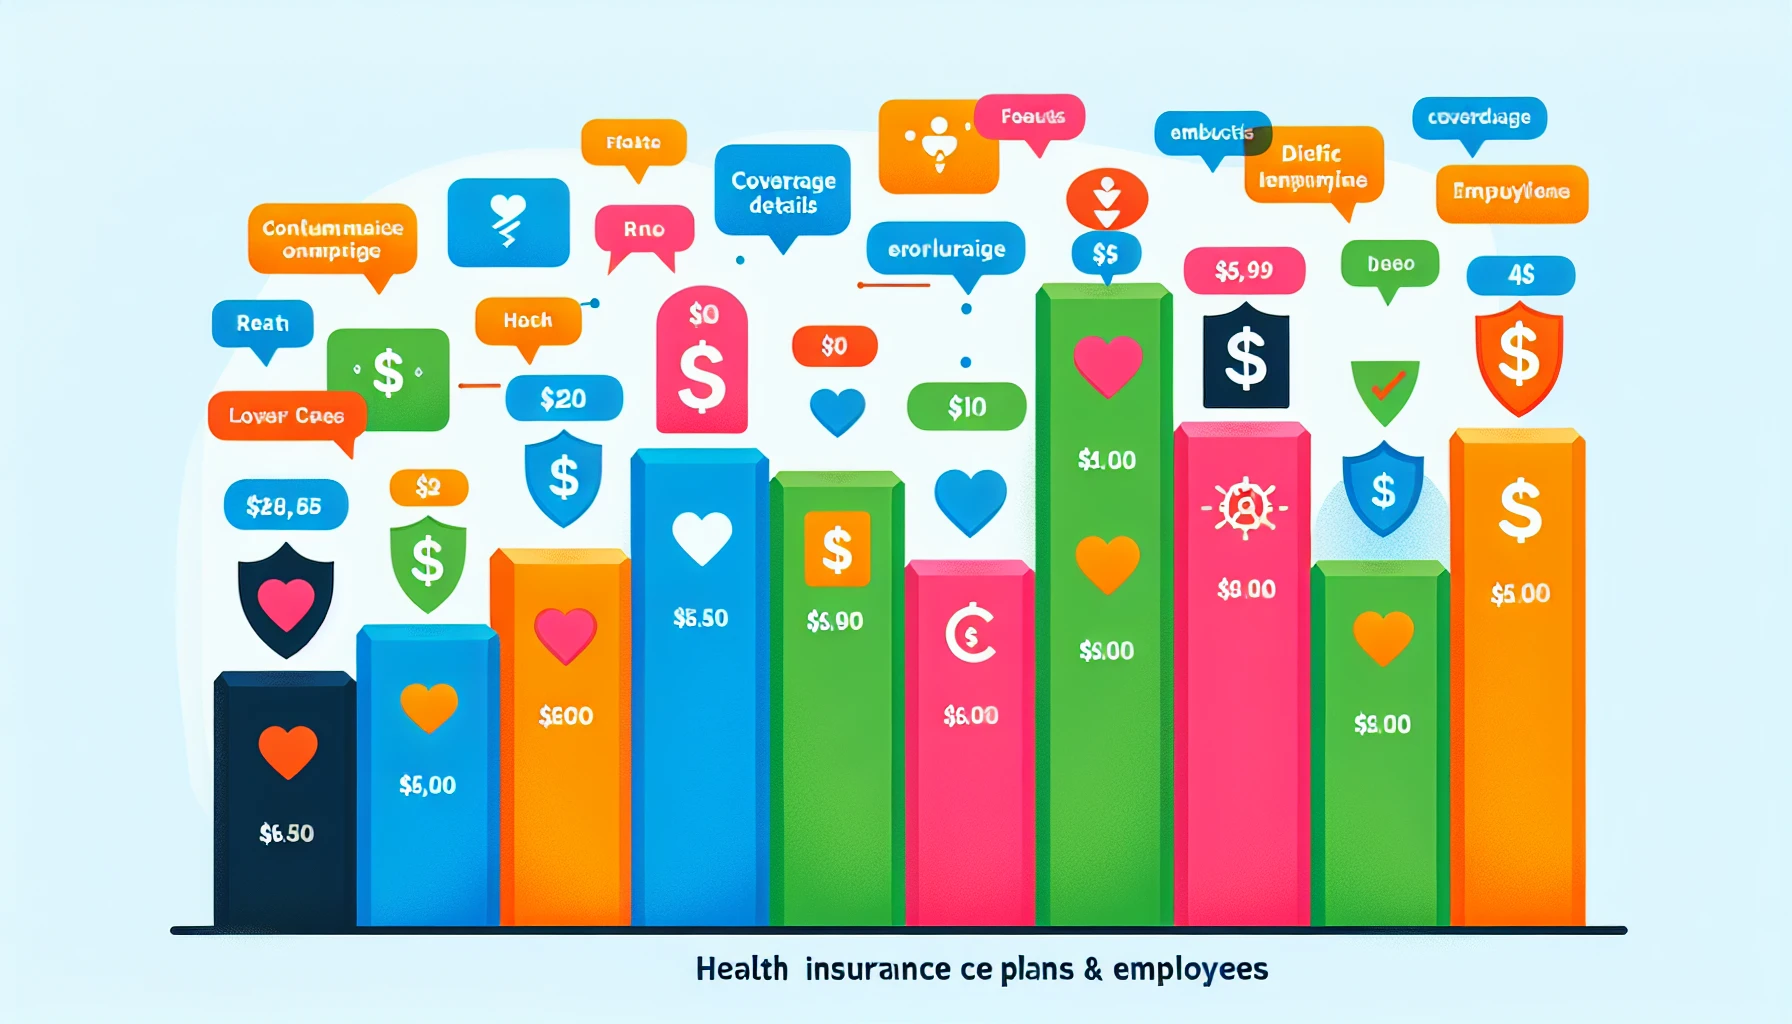 A chart comparing different health insurance plans for employees